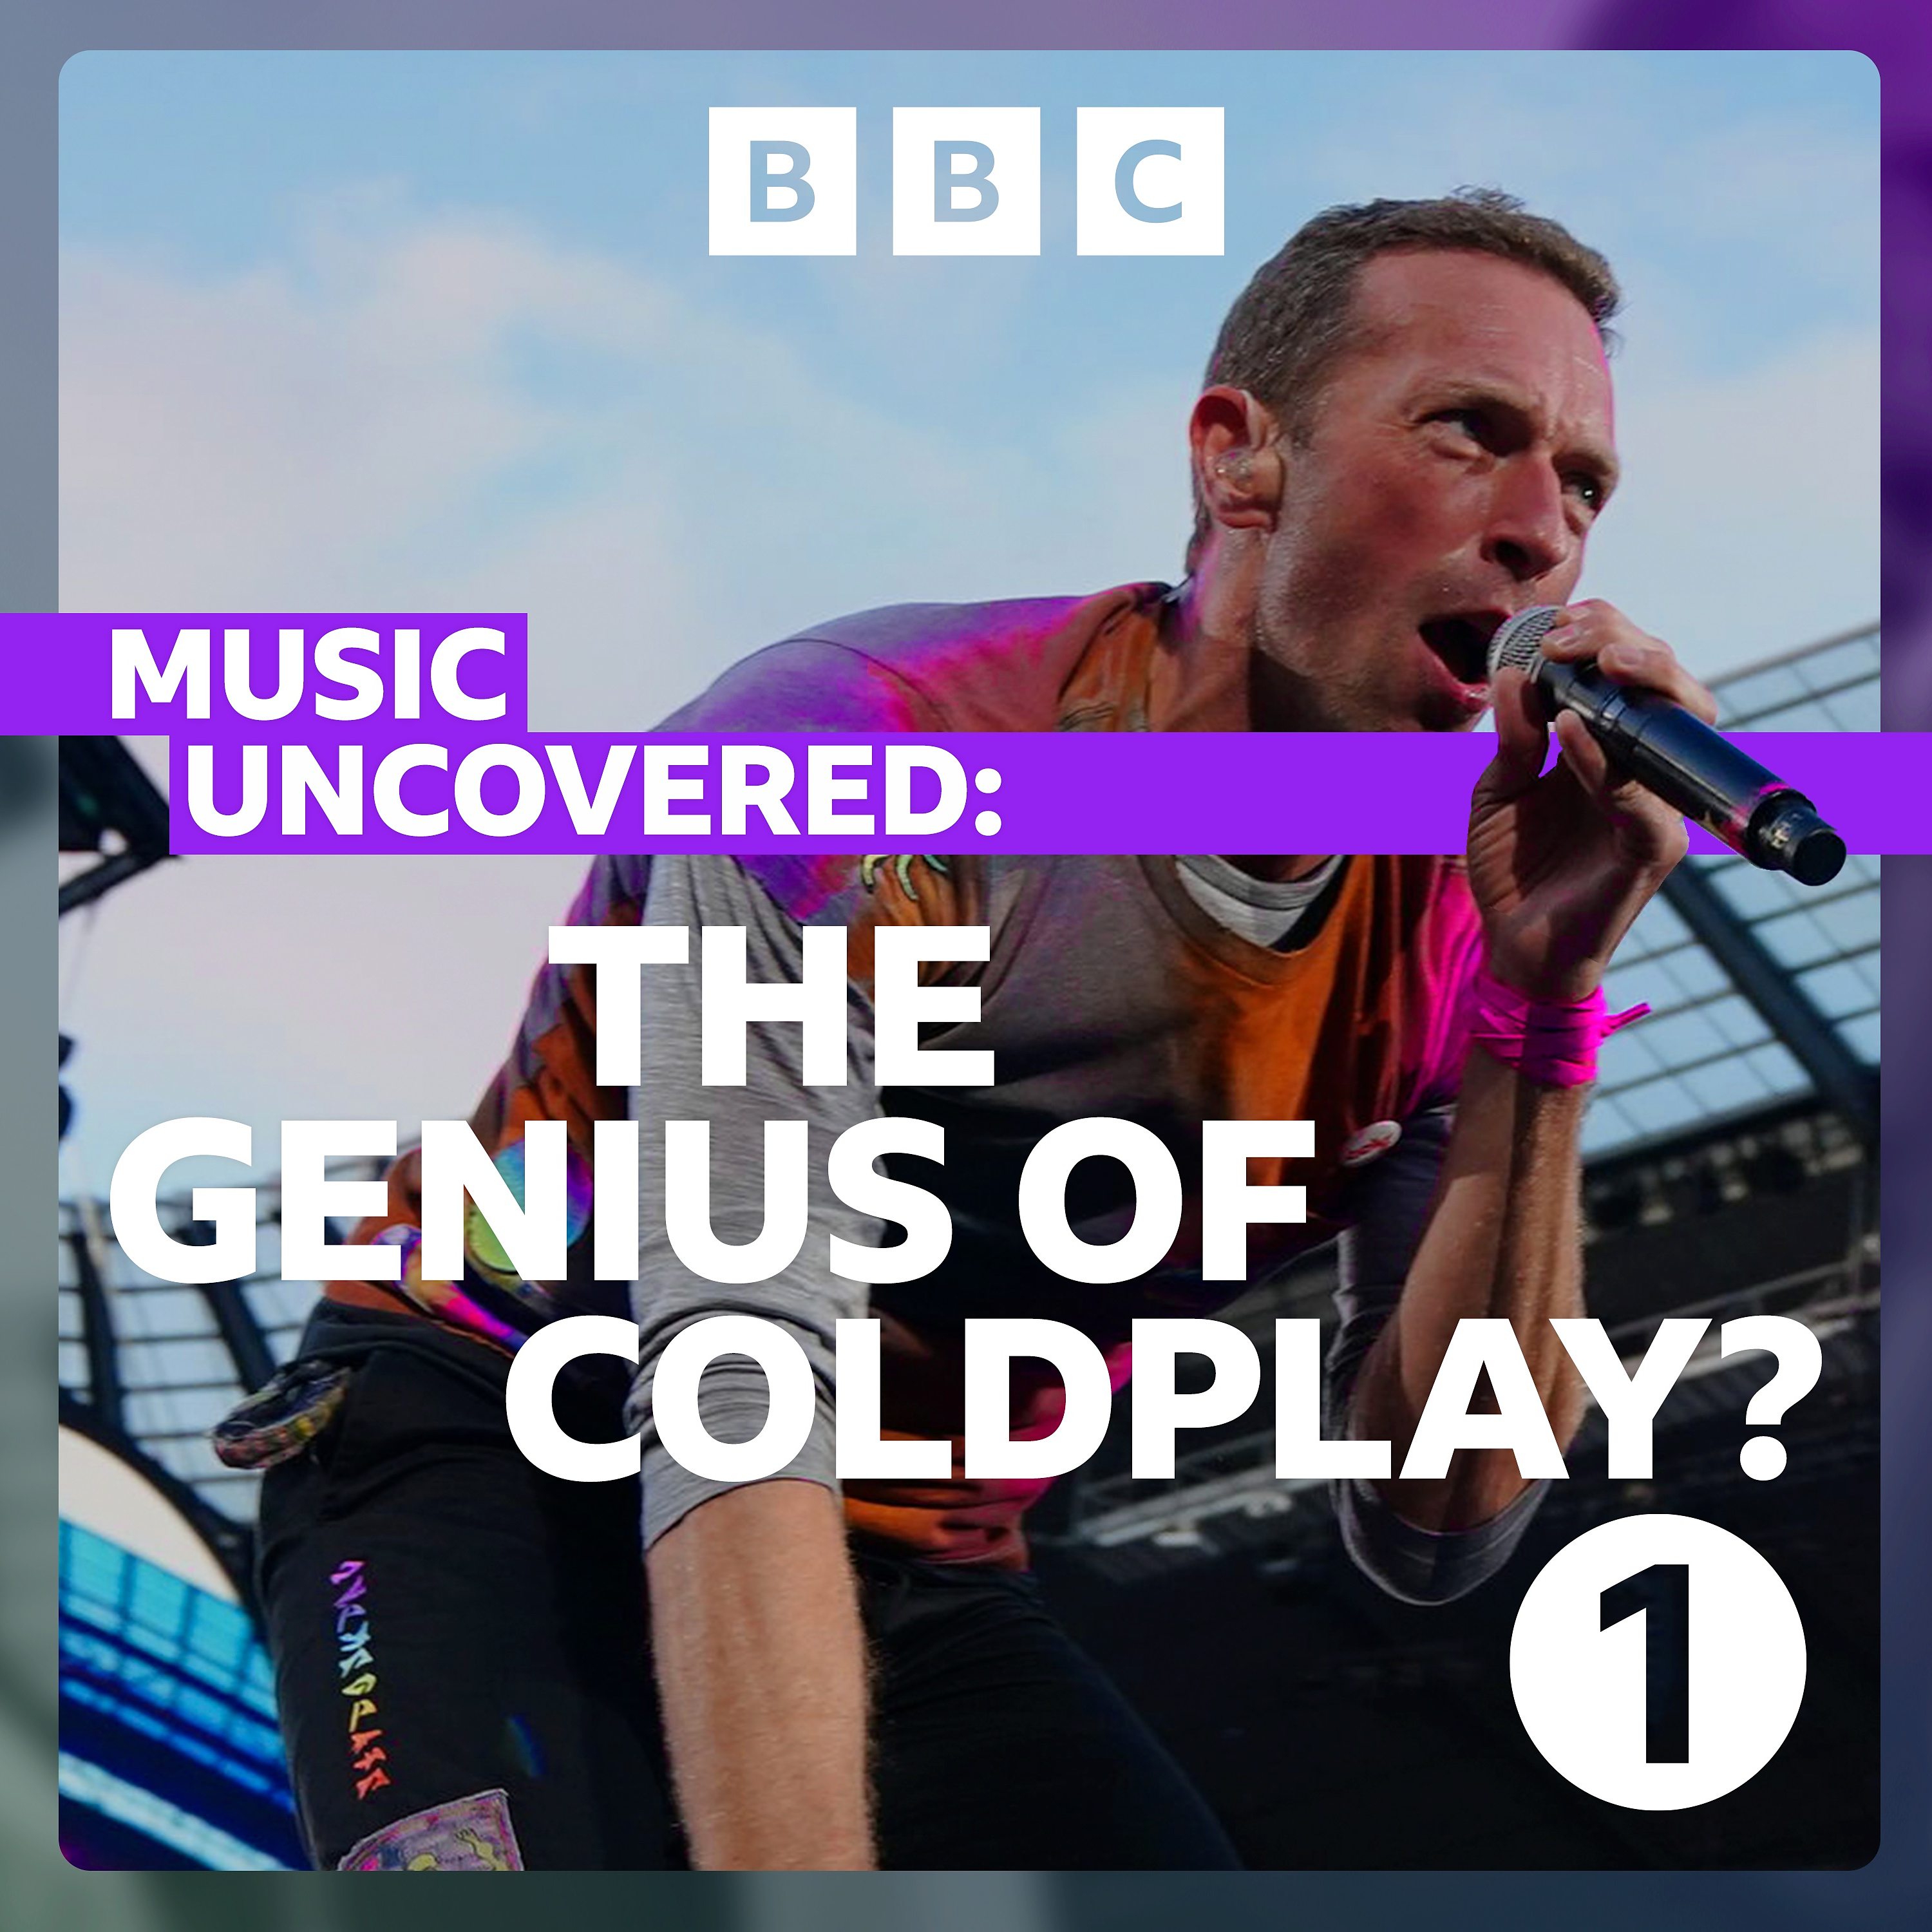 Coming soon... The Genius of Coldplay.